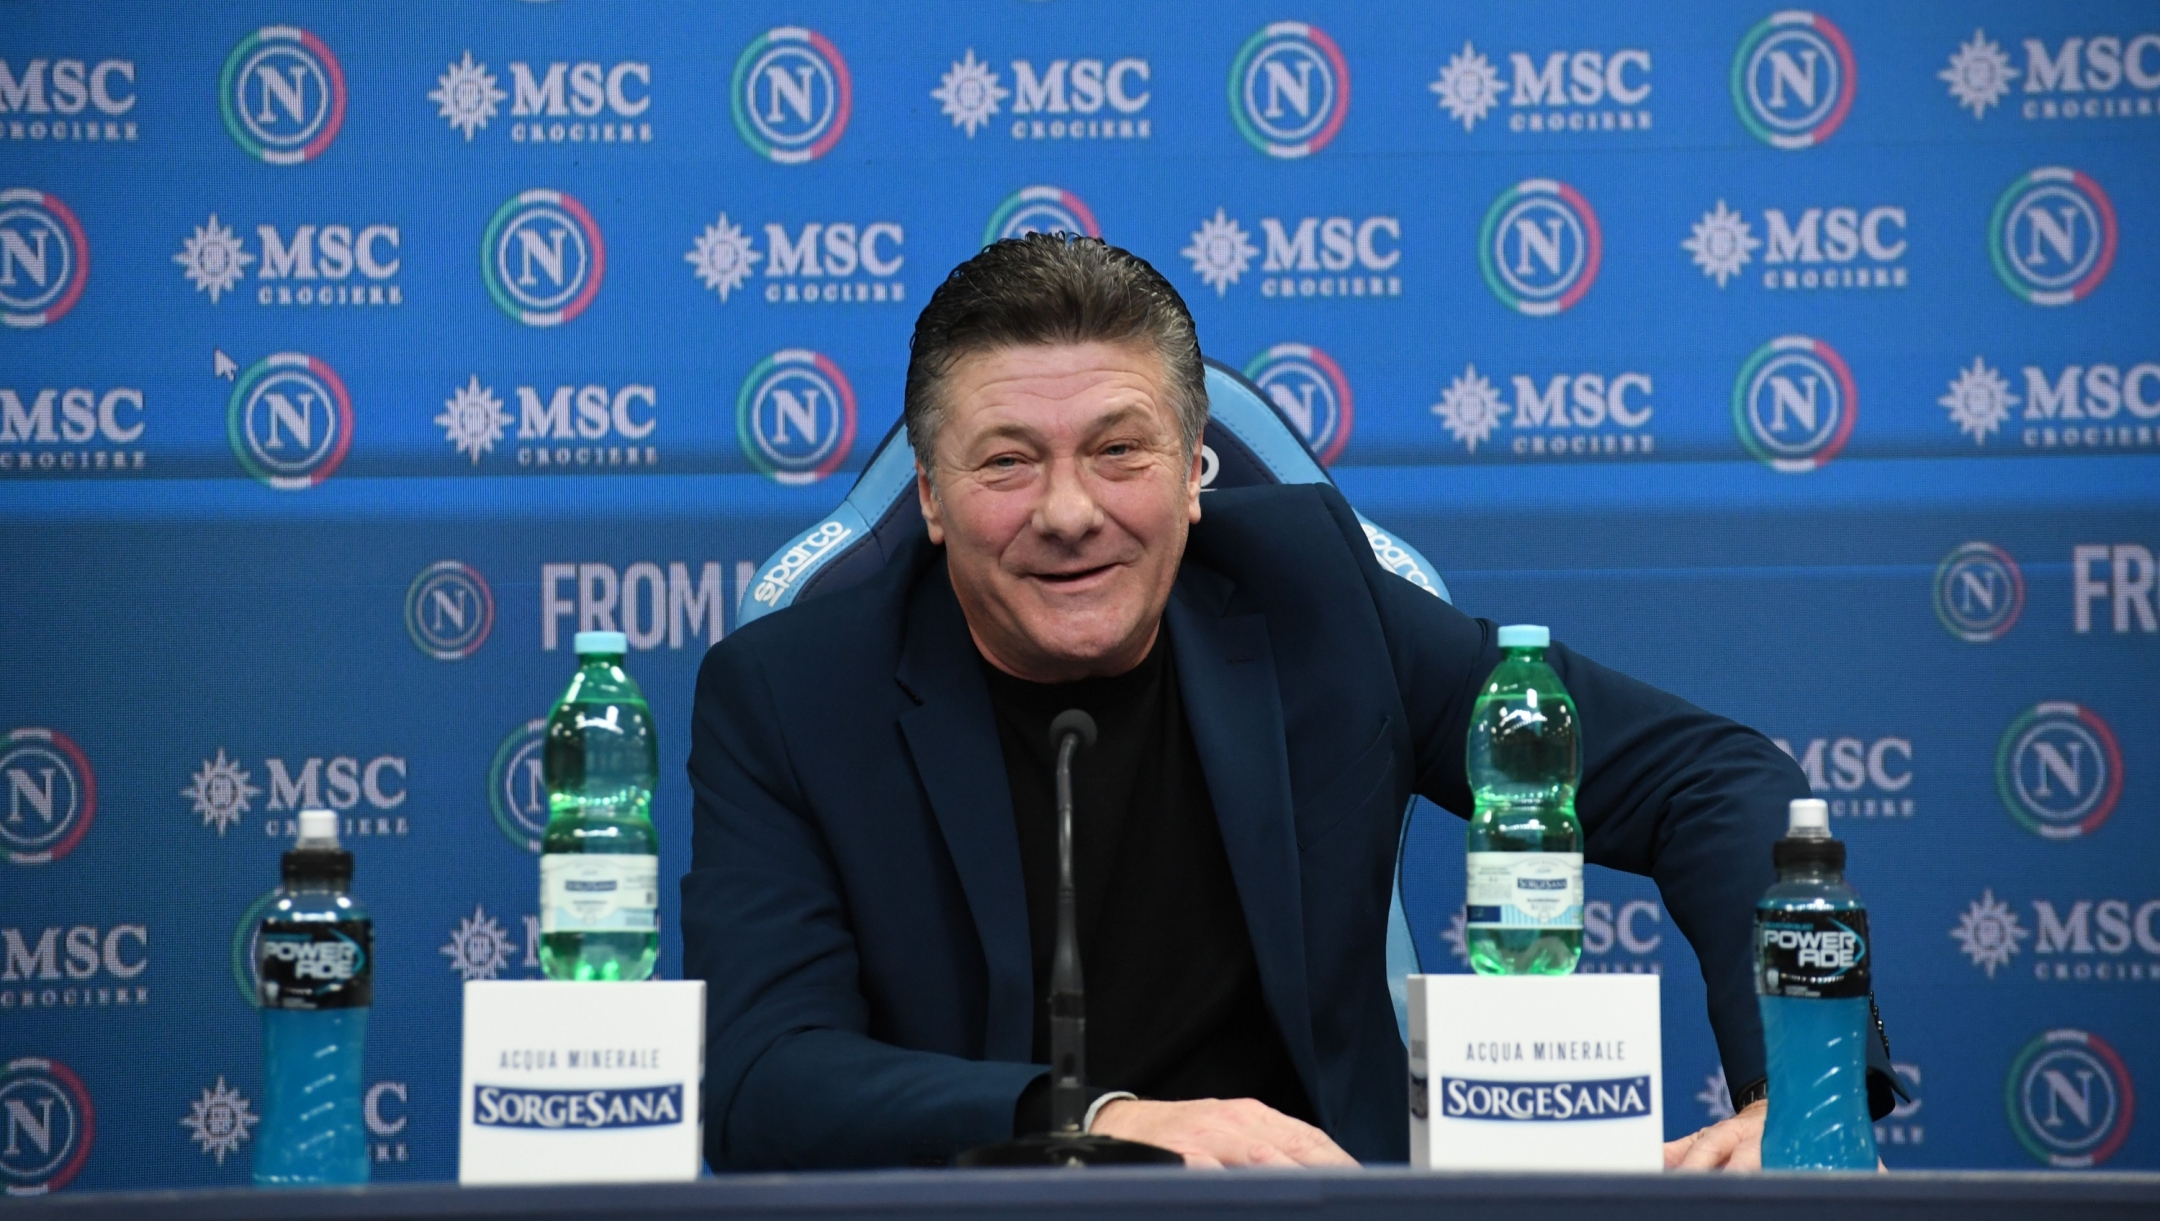 NAPLES, ITALY - NOVEMBER 24: Walter Mazzarri speaks at a press conference of Napoli on November 24, 2023 in Naples, Italy. (Photo by SSC NAPOLI/SSC NAPOLI via Getty Images)